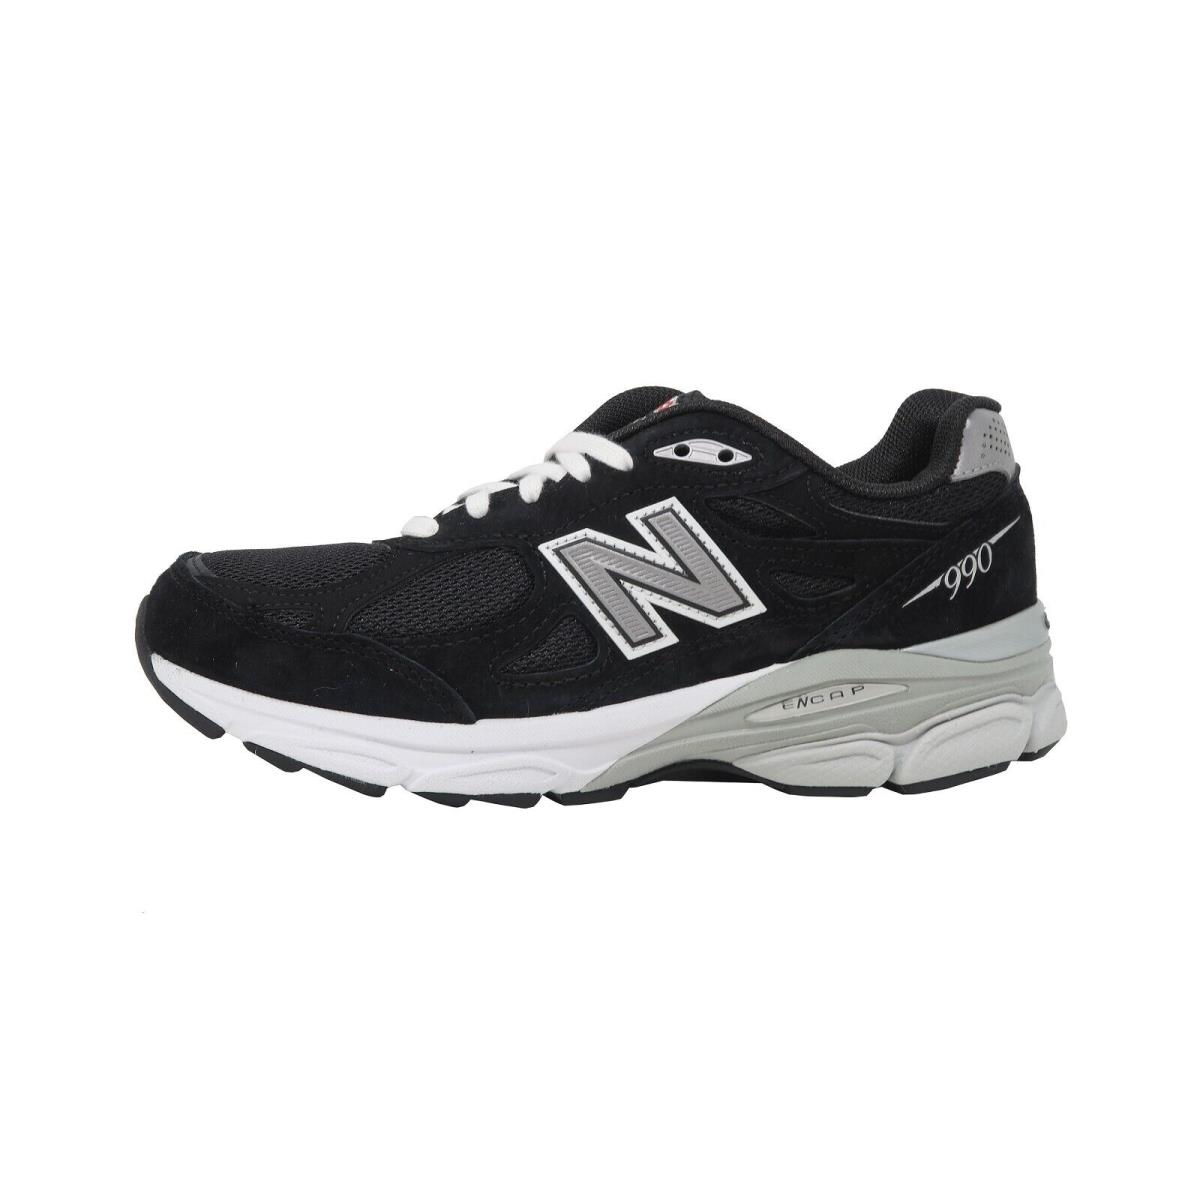 New Balance Women`s 990 Made in Usa Running Shoes Sneakers W990BK3 - Black/white